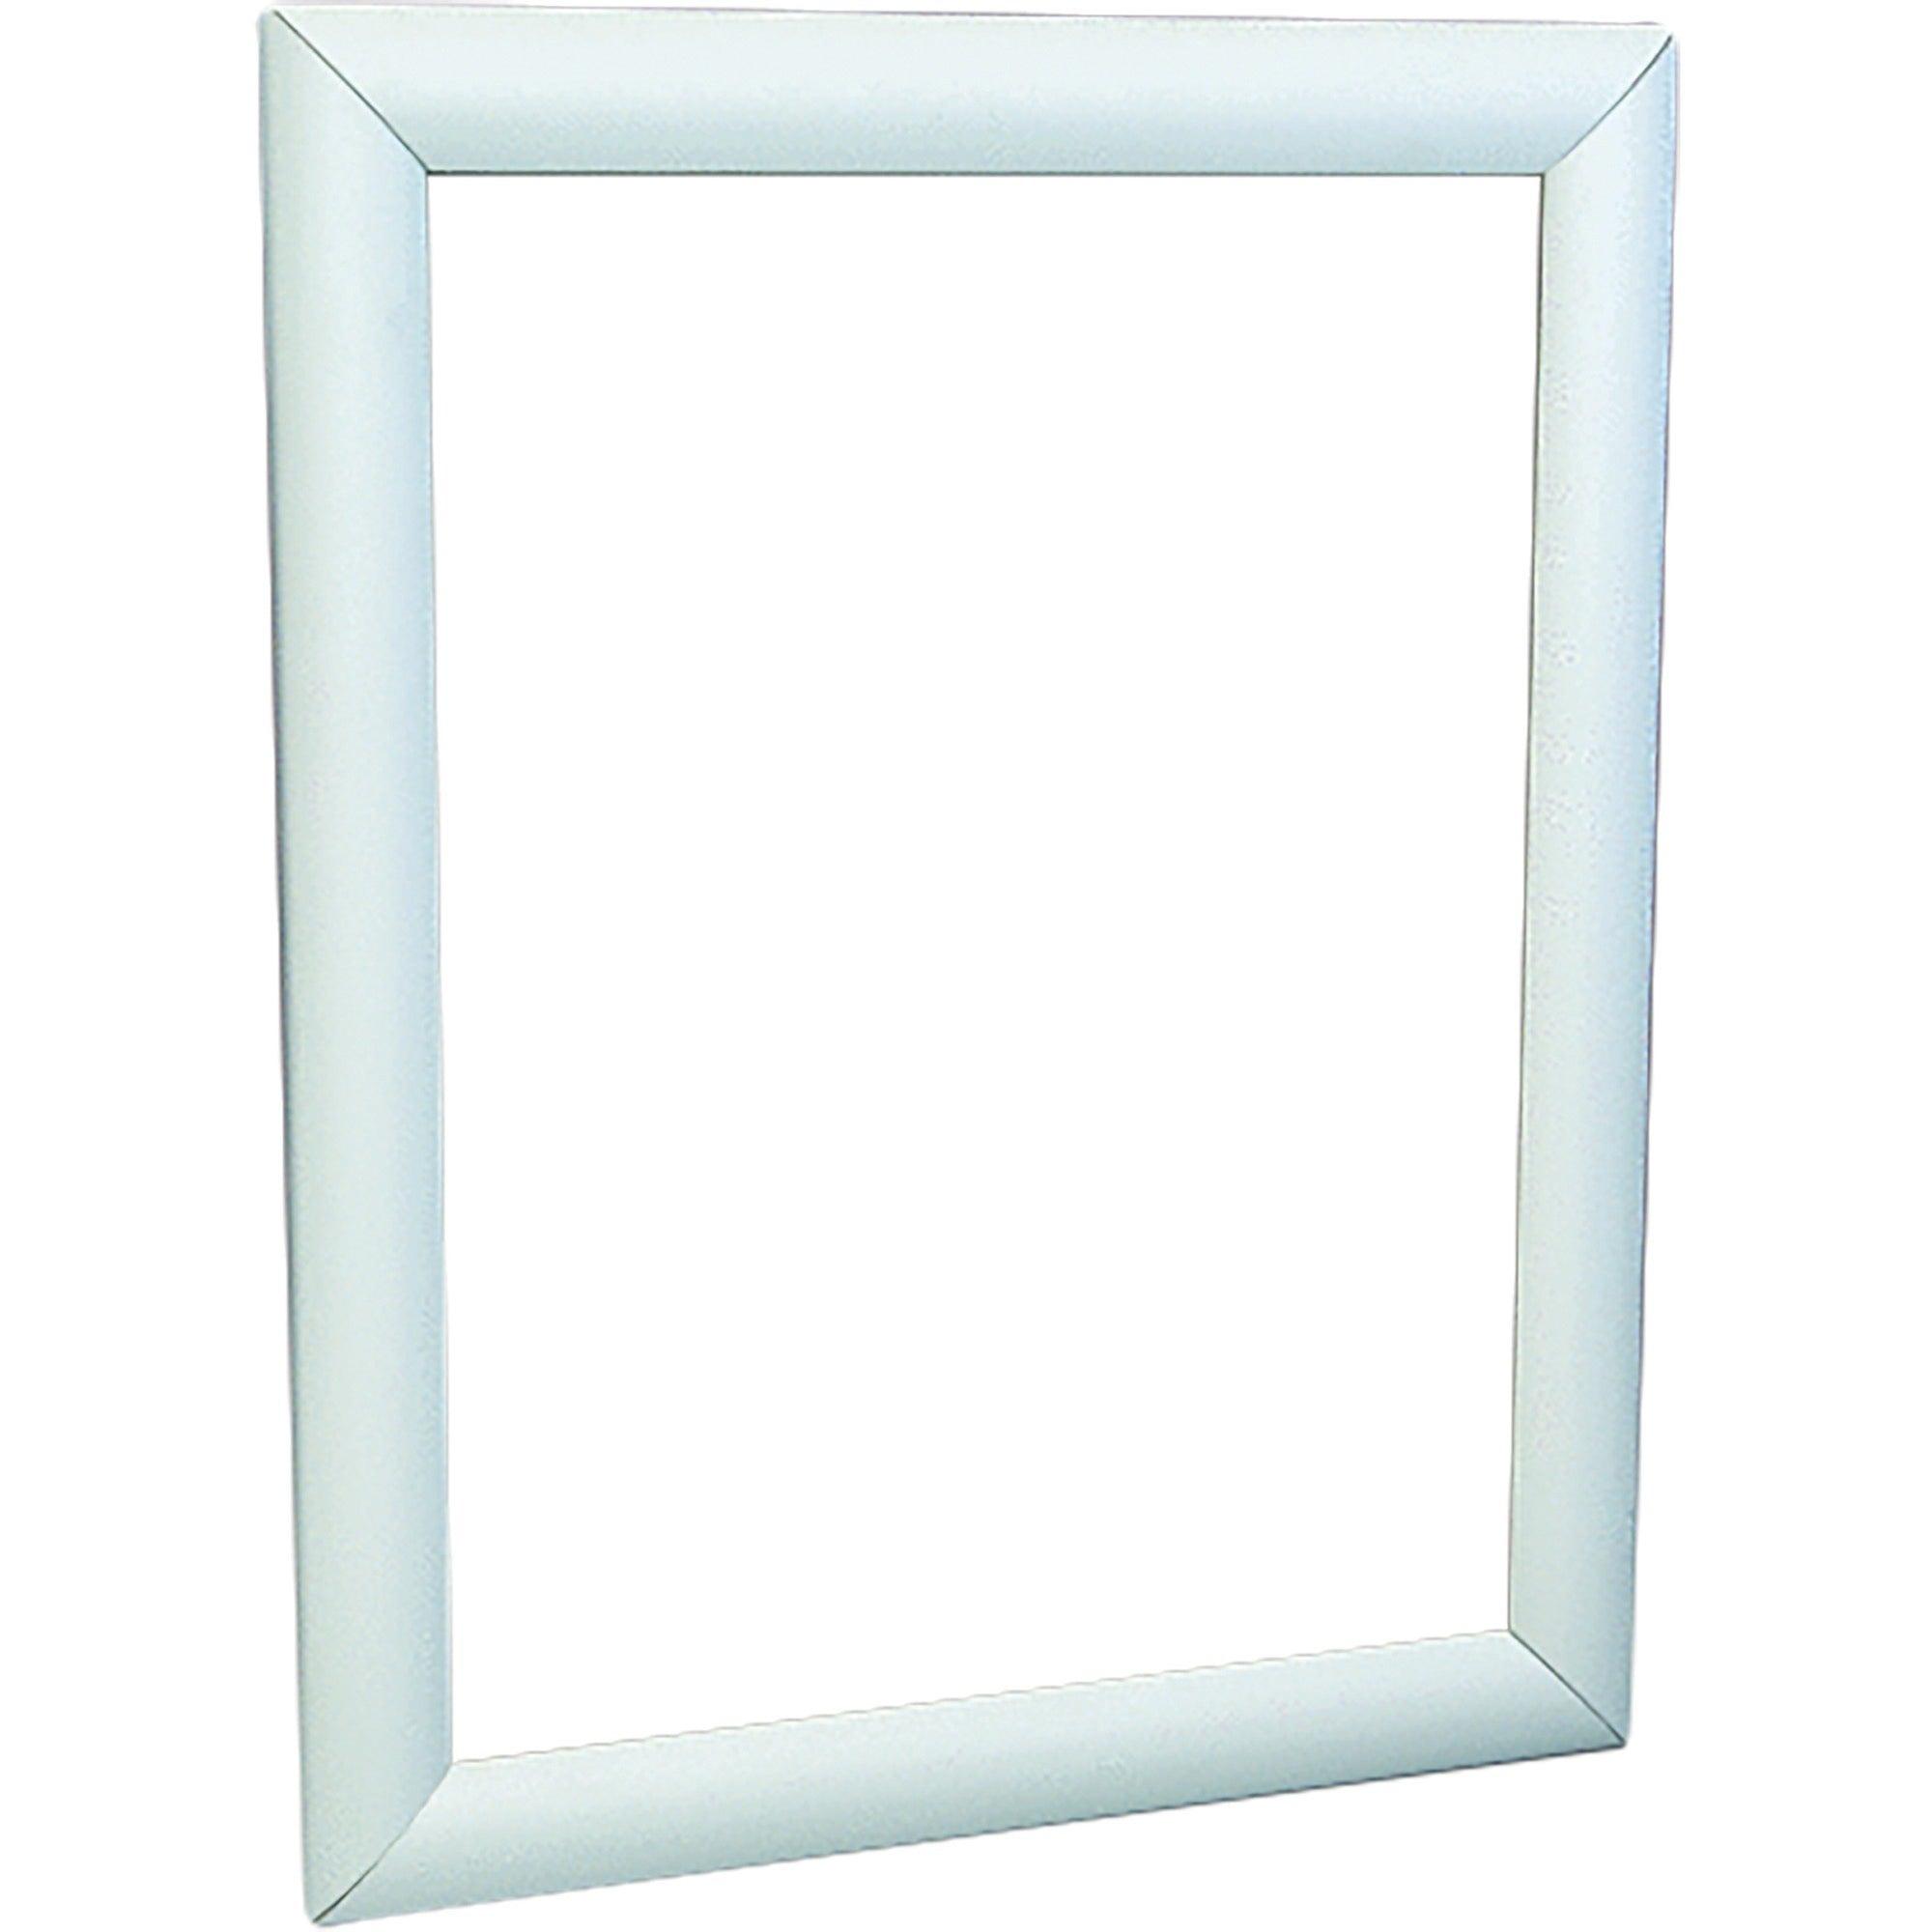 deflecto-wall-mount-display-frame-975-x-1225-frame-size-holds-850-x-11-insert-rectangle-vertical-horizontal-satin-front-loading-anti-glare-dust-resistant-debris-resistant-1-each-aluminum-clear-silver_def690001 - 4